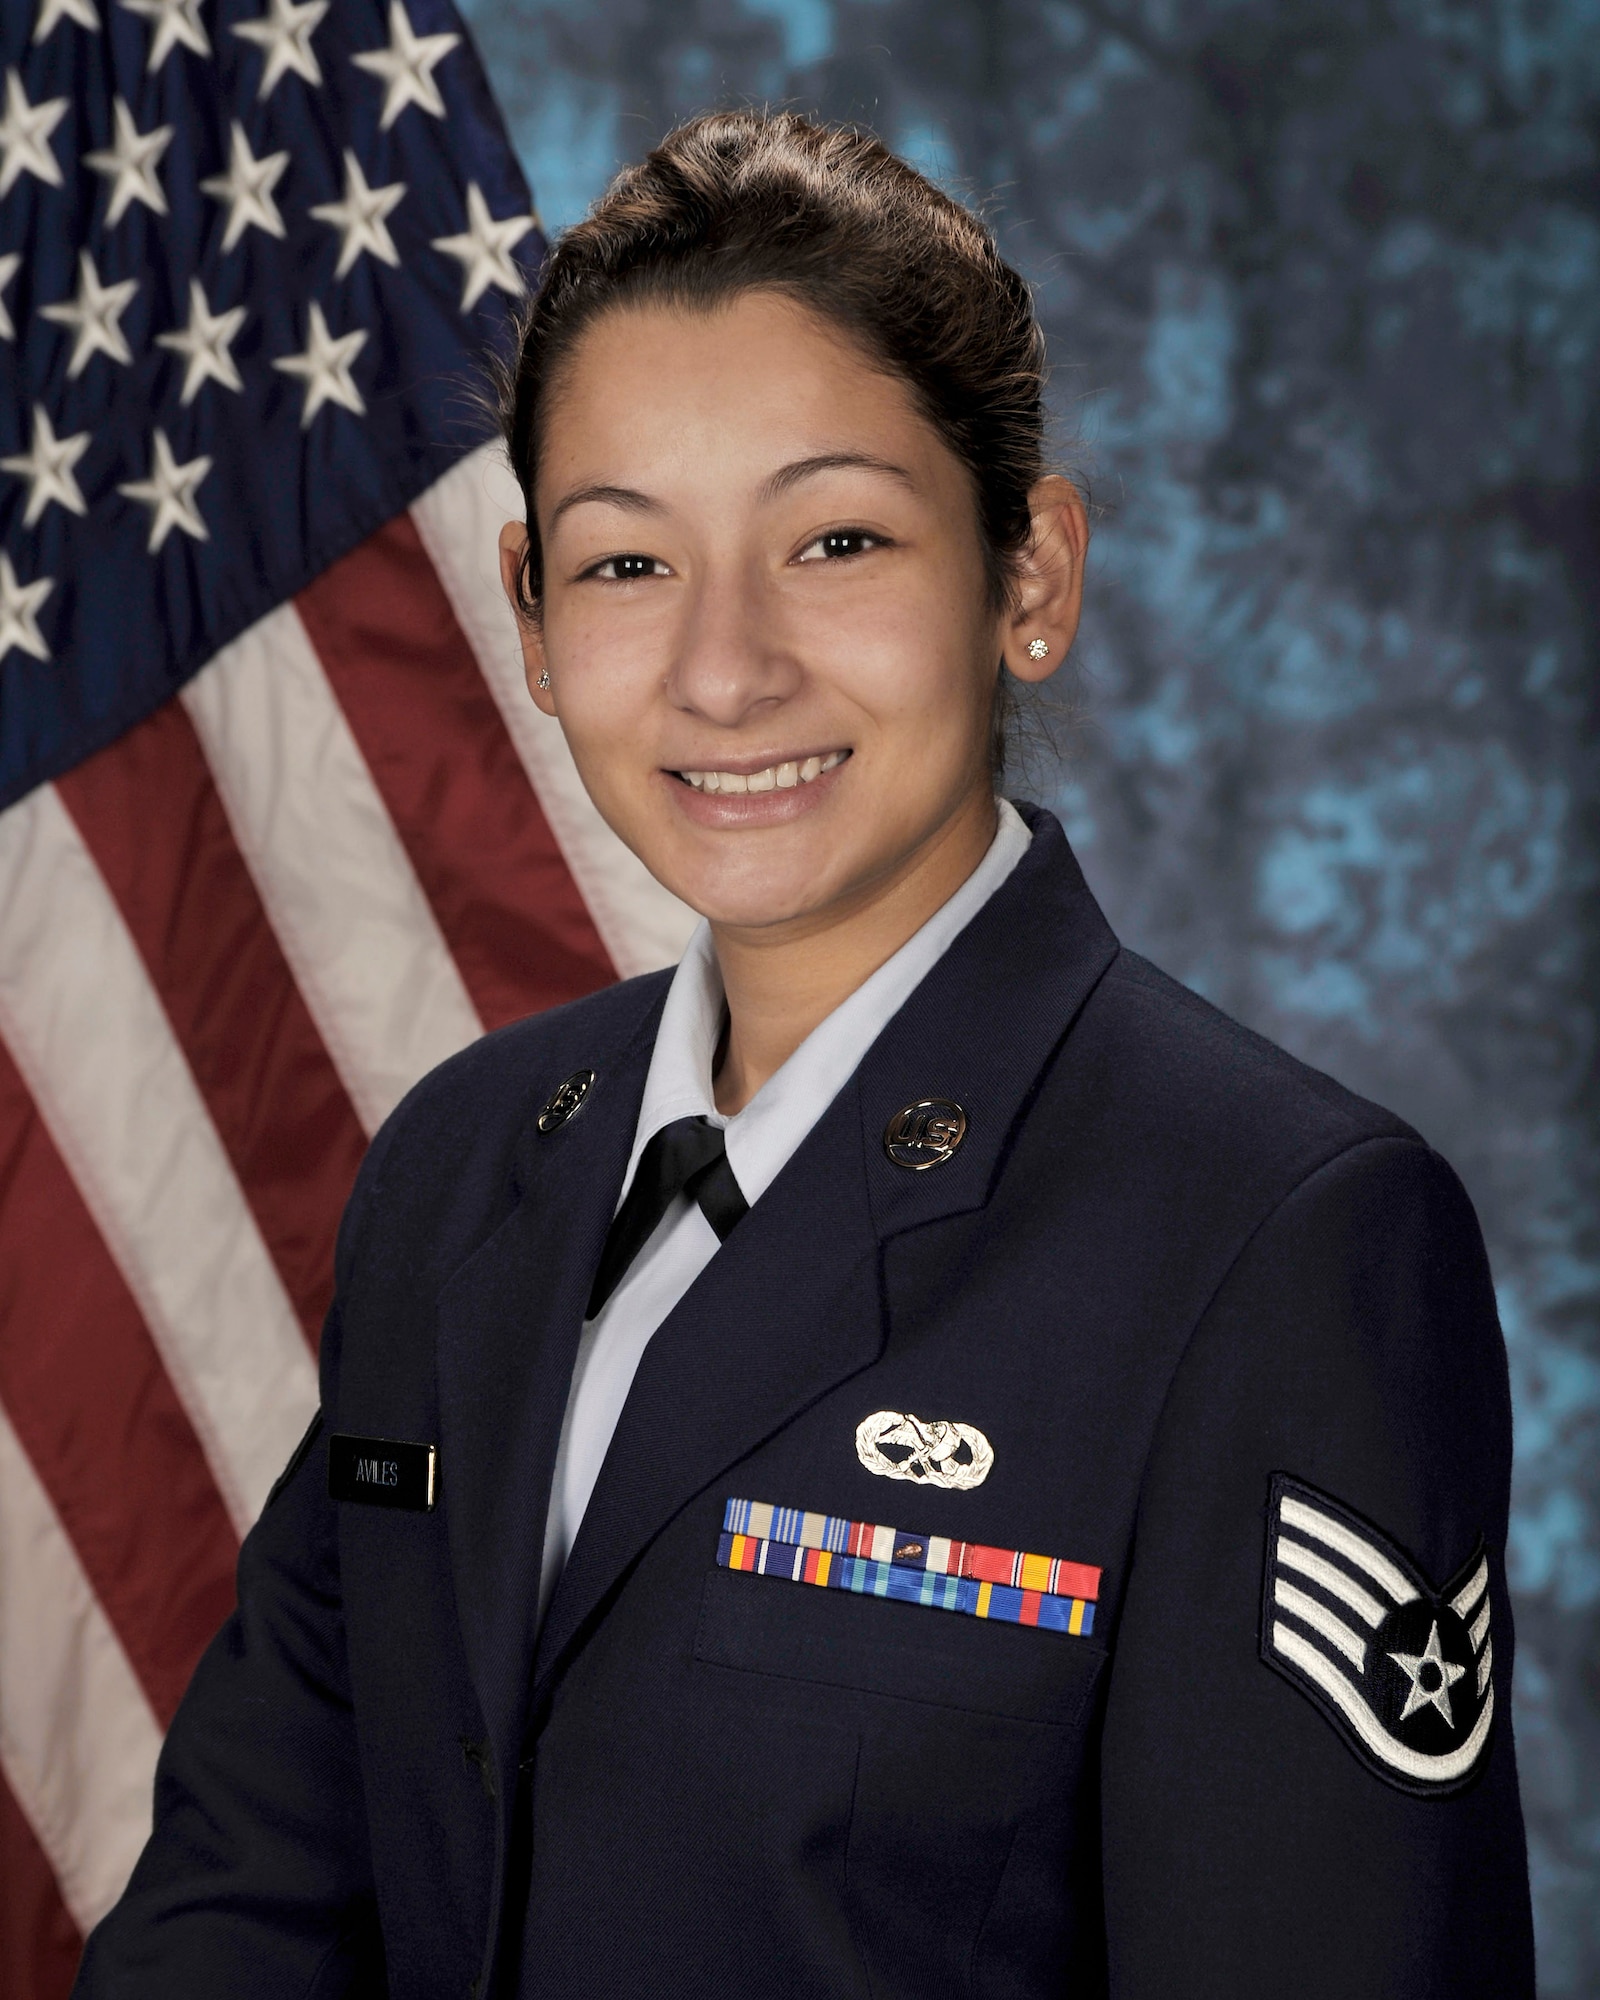 Staff Sgt. Johanna Aviles, a network operations technician assigned to the West Coast Communications Support Element at Los Angeles Air Force Base, Calif., monitored homeland unmanned aircraft system missions during the California wildfires where more than 72 fires were identified and contained. The 12 Outstanding Airmen of the Year are selected based on superior leadership, job performance, significant self-improvement/ personal achievements and base/community involvement. The Air Force Chief of Staff reviews the selections. The selections for the 2009 12 Outstanding Airmen of the Year were announced July 2 by Air Force officials at Randolph Air Force Base, Texas. (U.S. Air Force photo)
